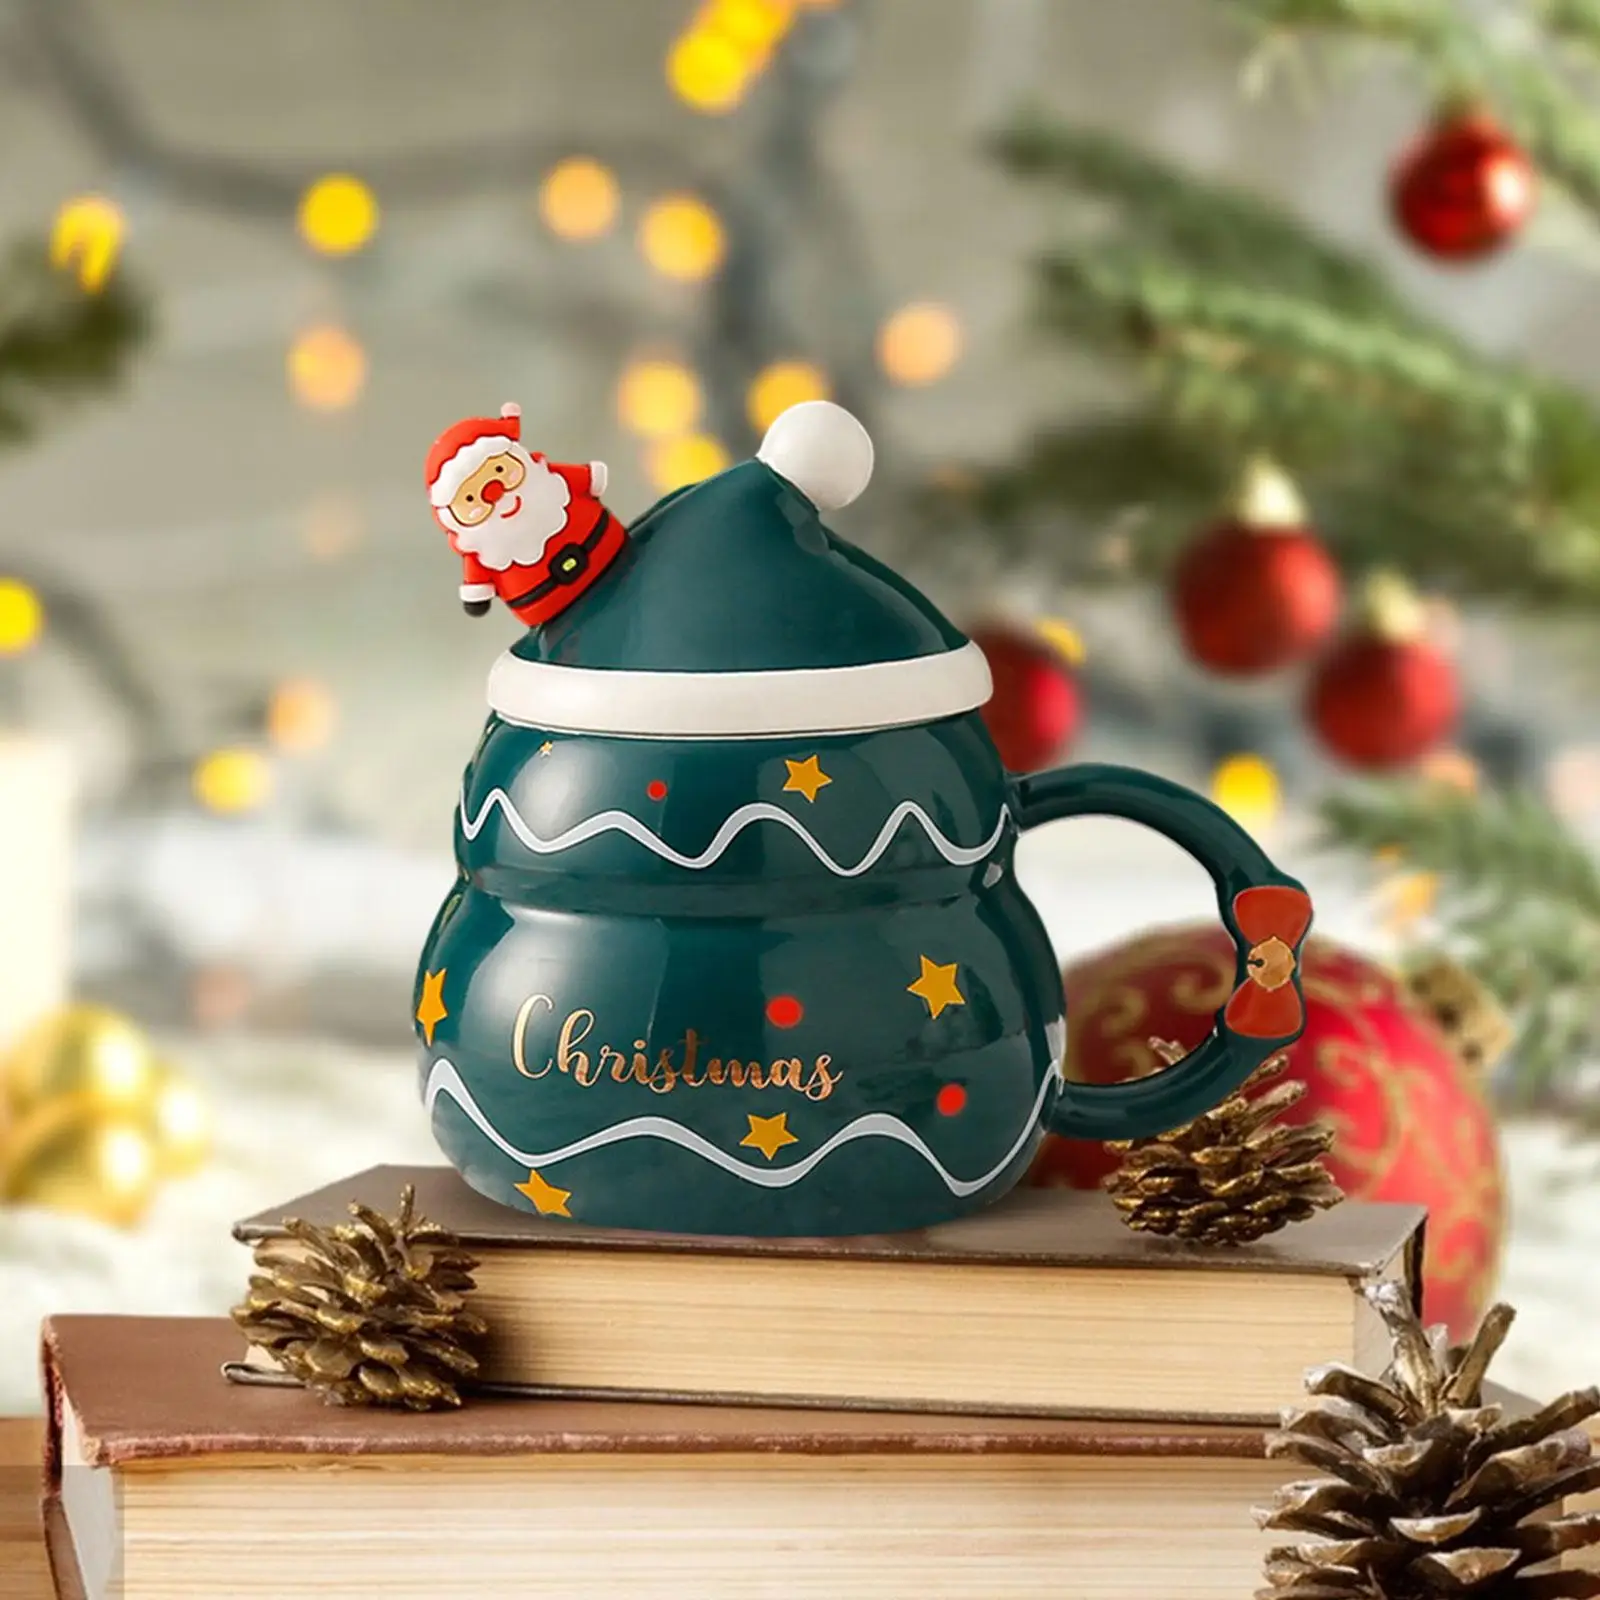 Christmas Coffee Mug Xmas Morning Cup with Santa Figurine Tea with Lid Cup Water Cup for Daily Using Home Kitchen 